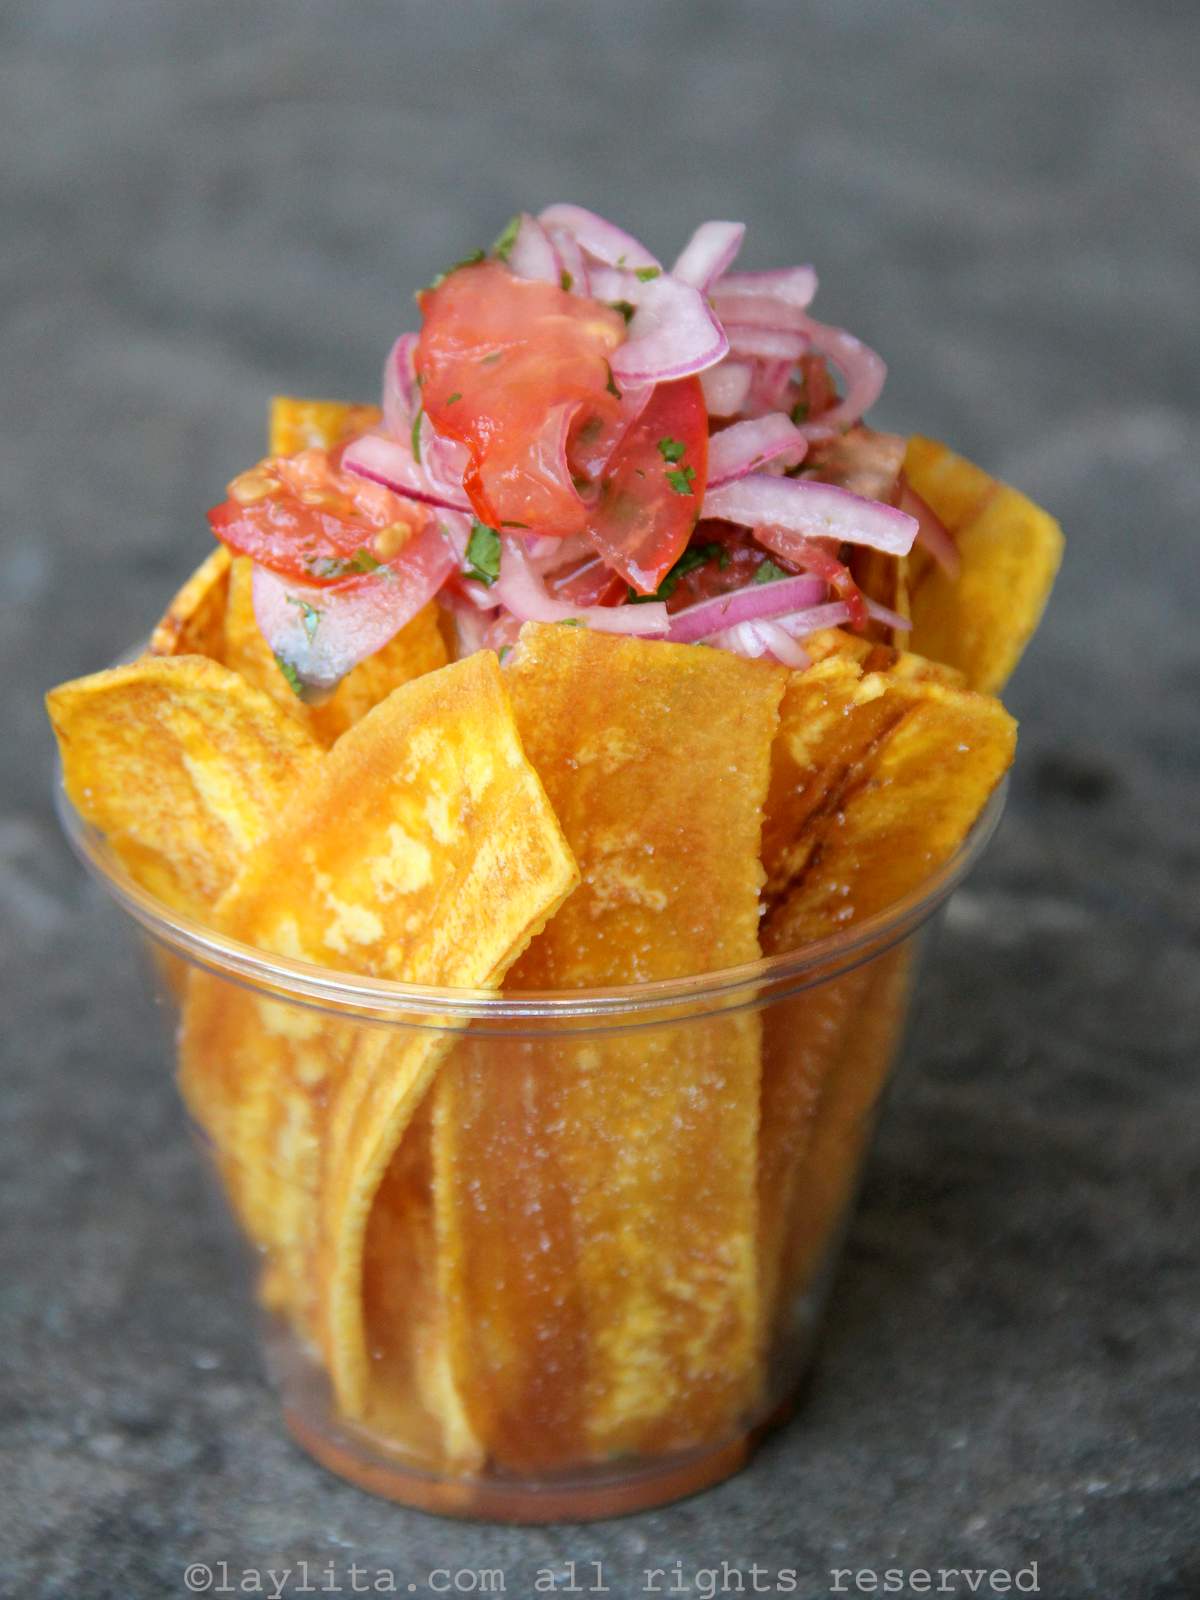 Thin fried green plantain chips or chifles - topped wiht tomato onion curtido salsa